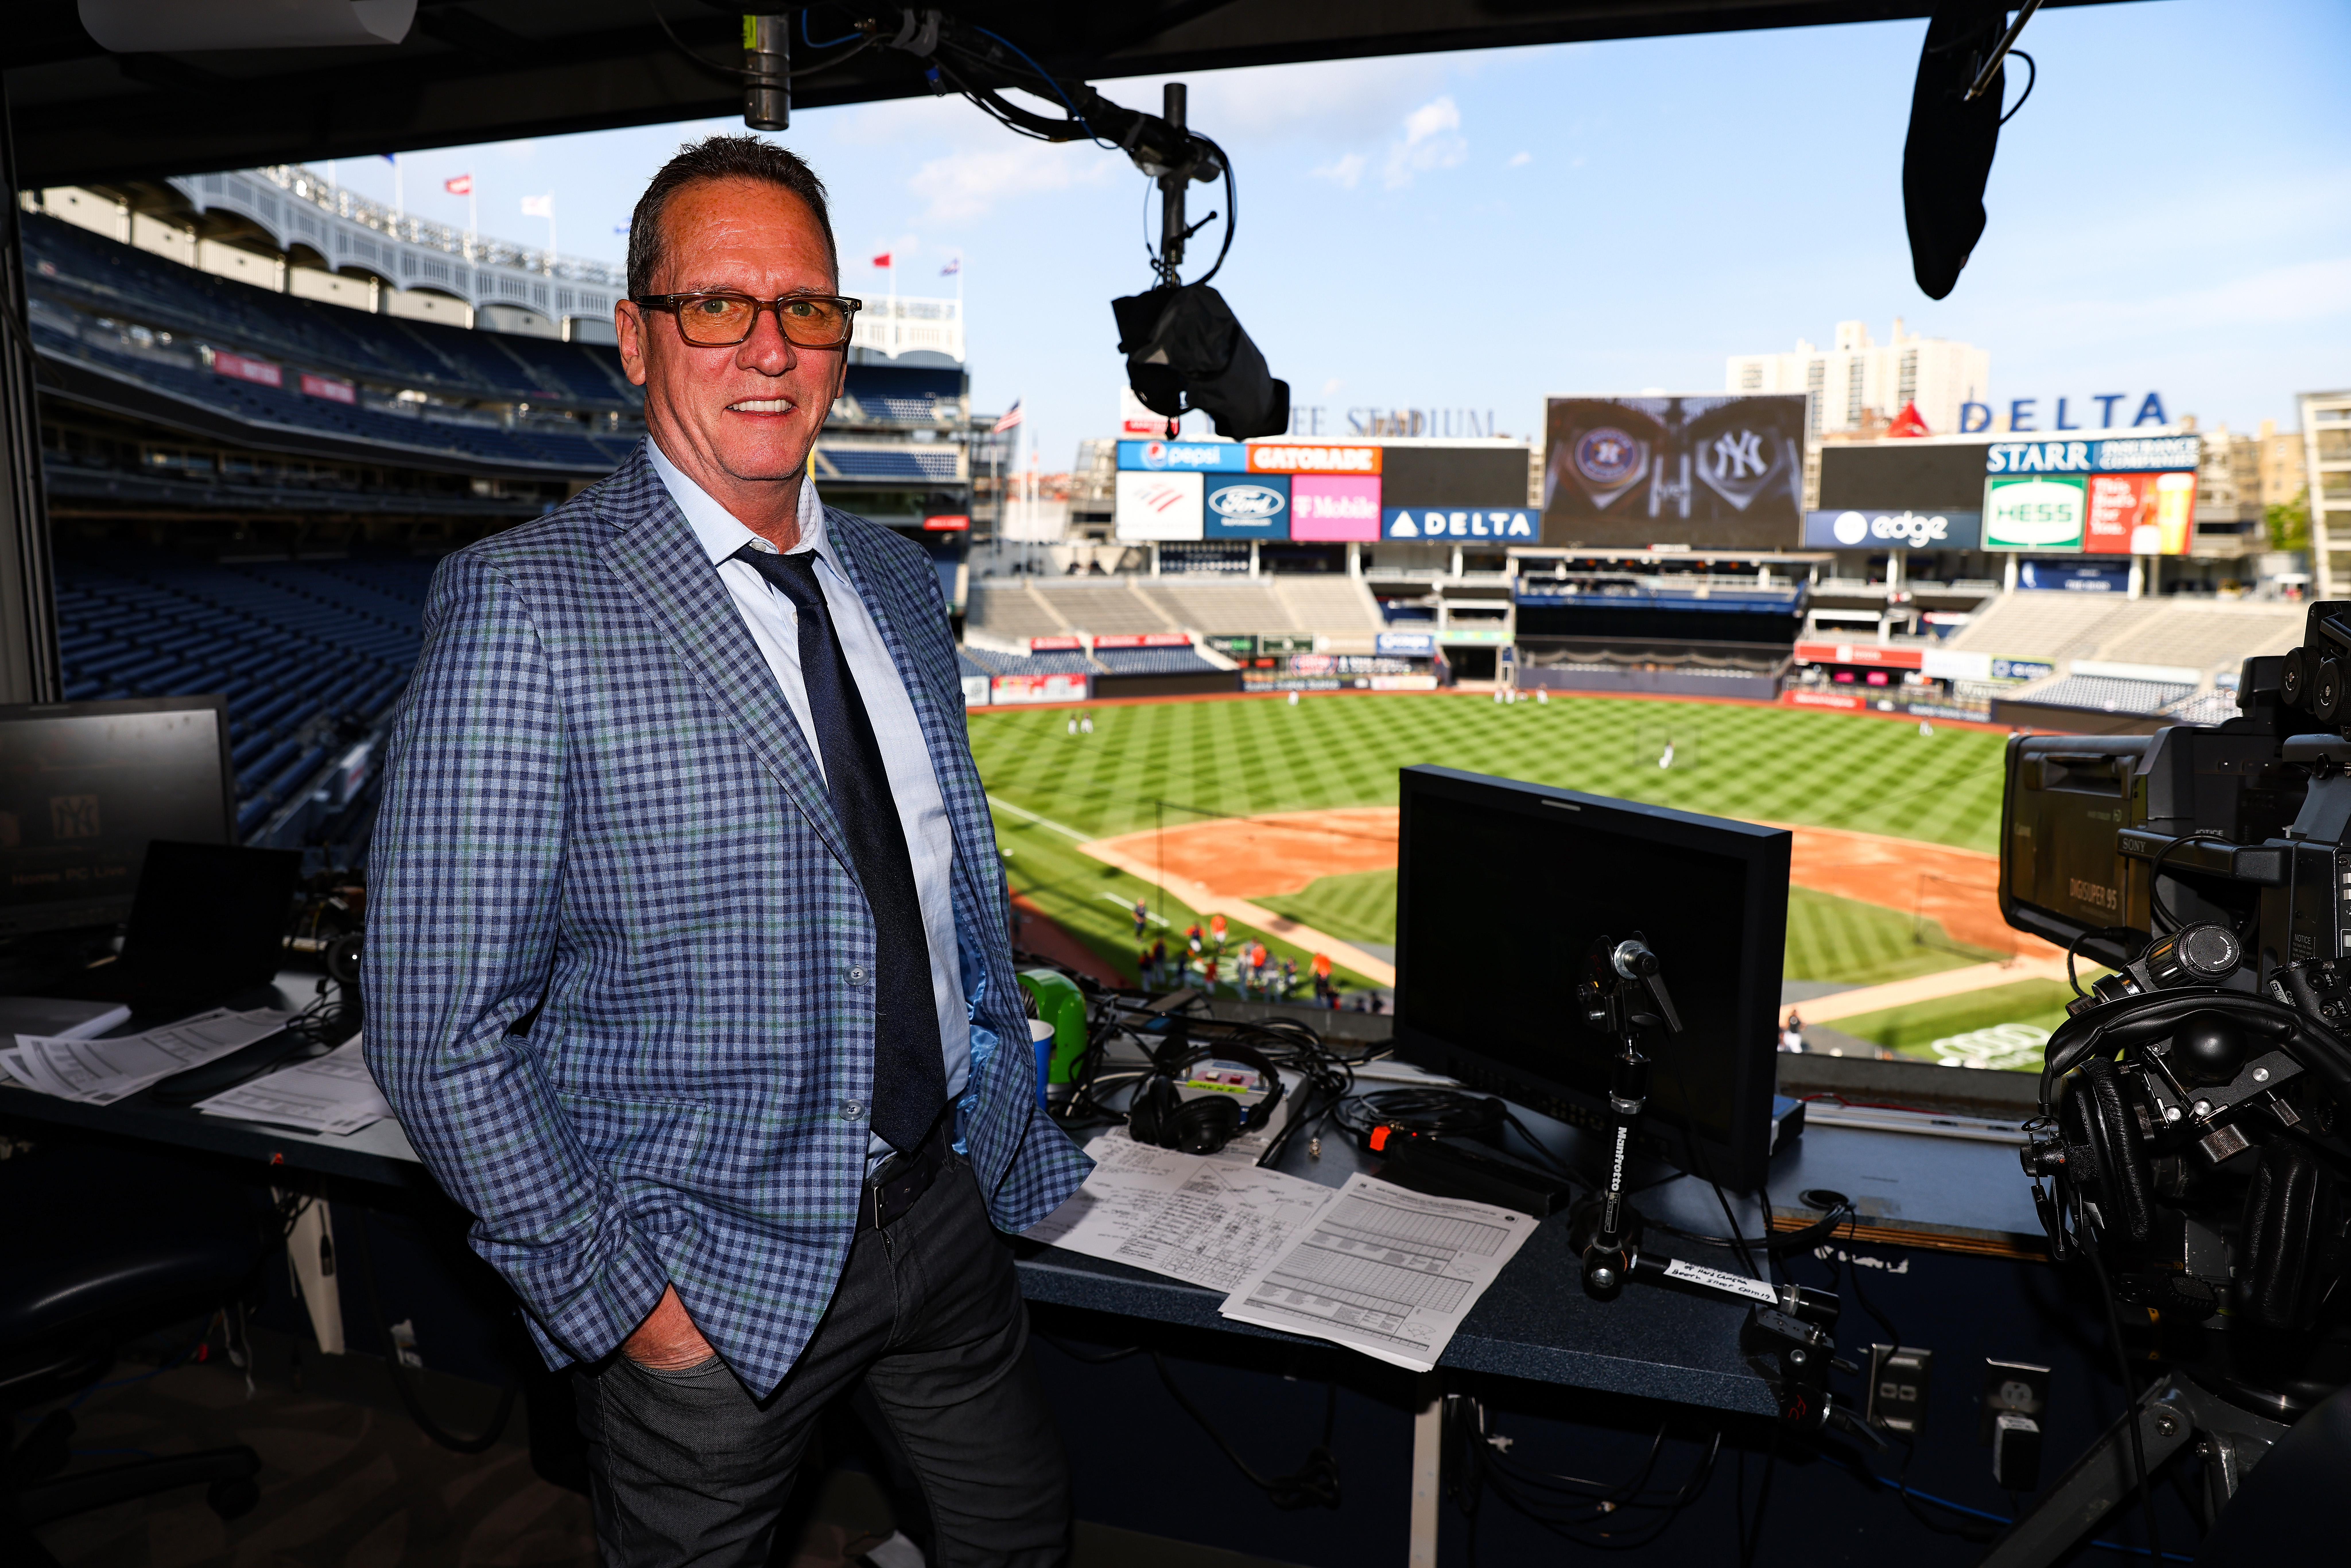 Yankees' David Cone says 'exotic' Red Sox pitcher had an impact on